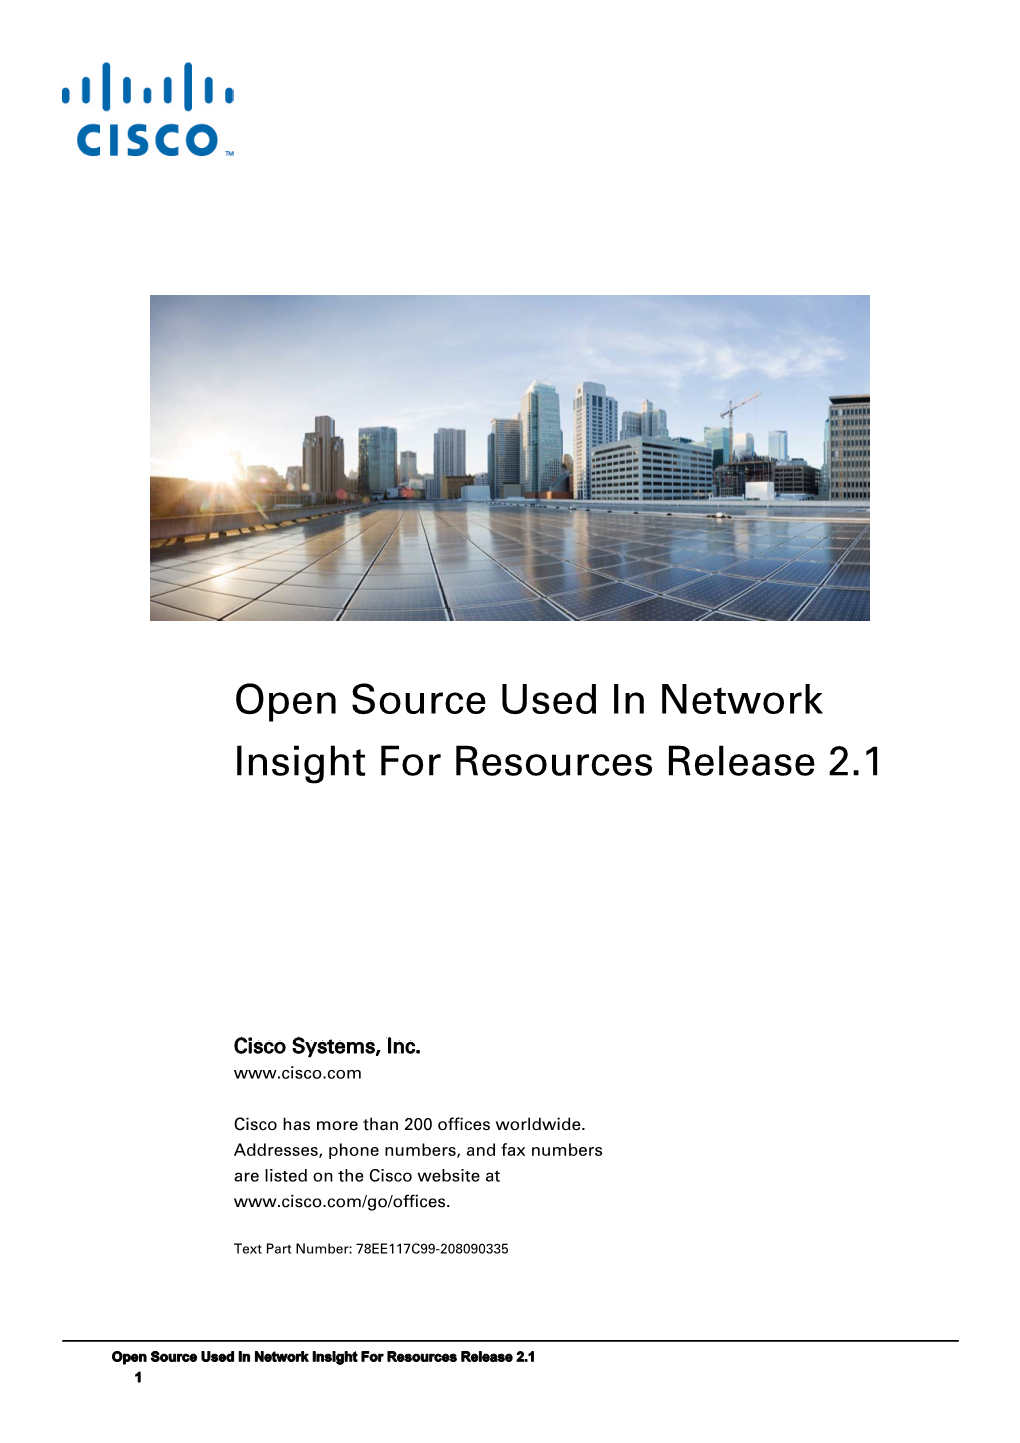 Open Source Used in Network Insight for Resources Release 2.1